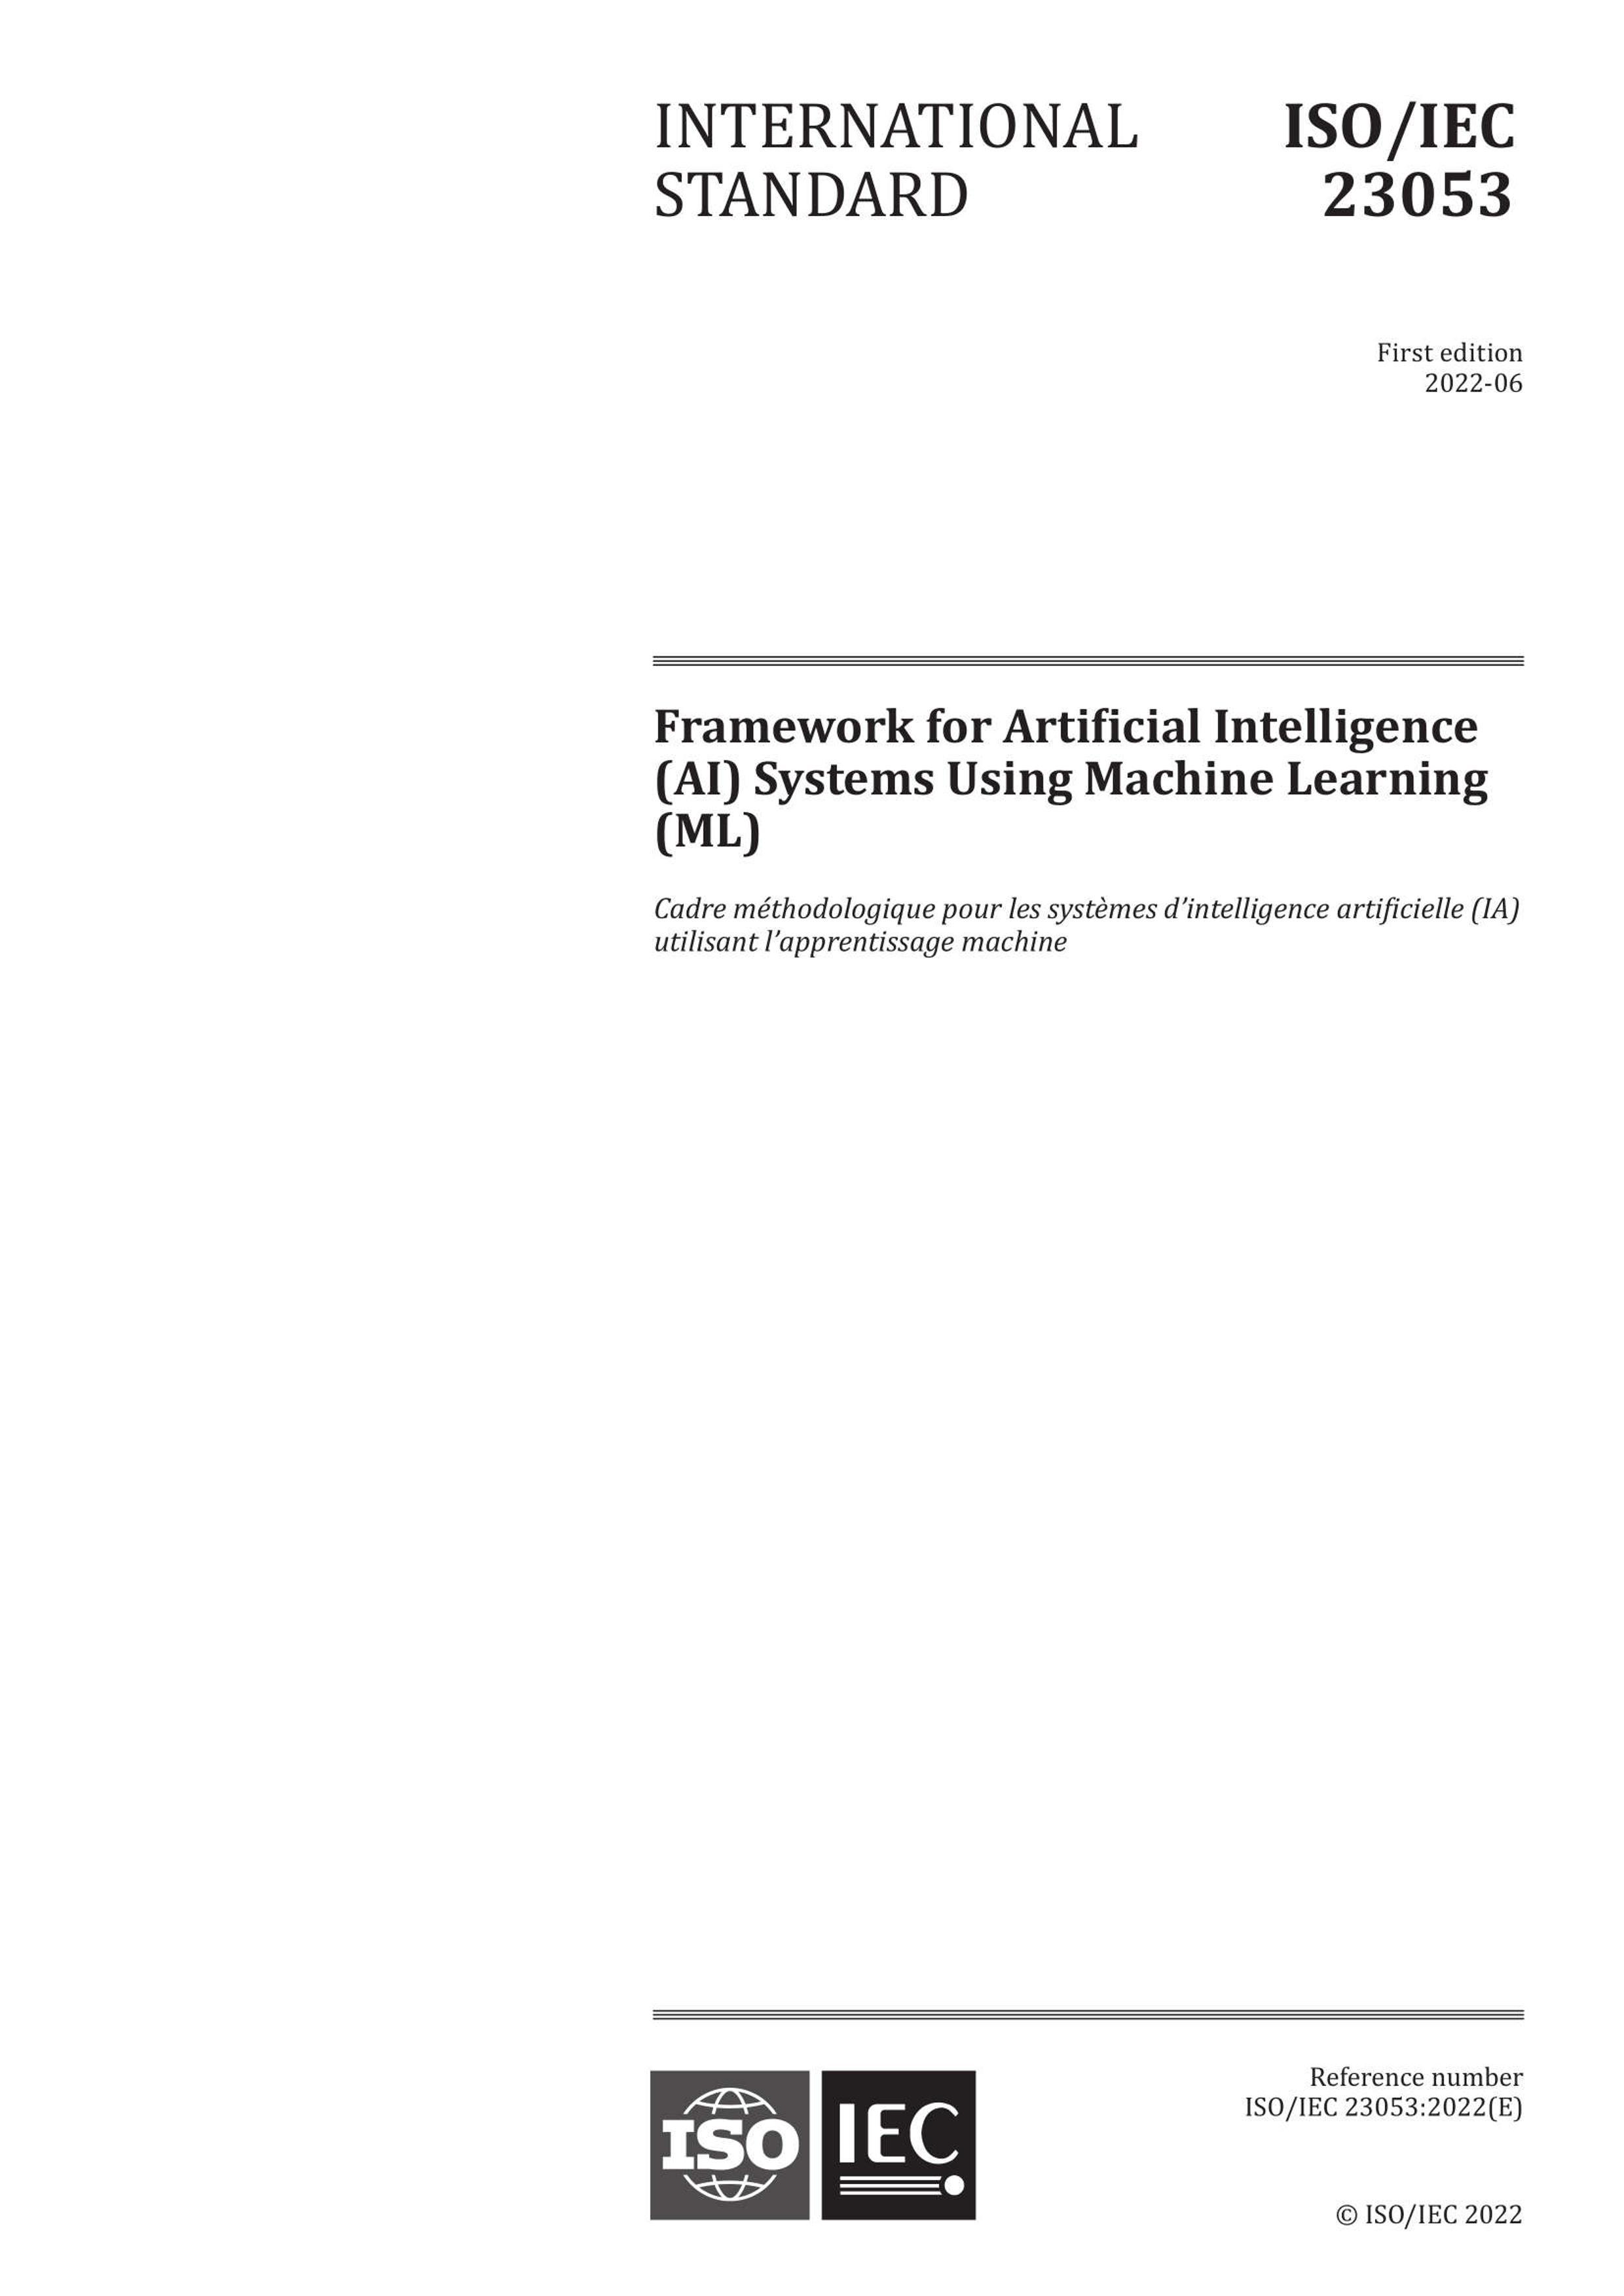 ISOMIEC 23053-2022 Framework for Artificial Intelligence (AI) Systems Using Machine Learning (ML).pdf1ҳ